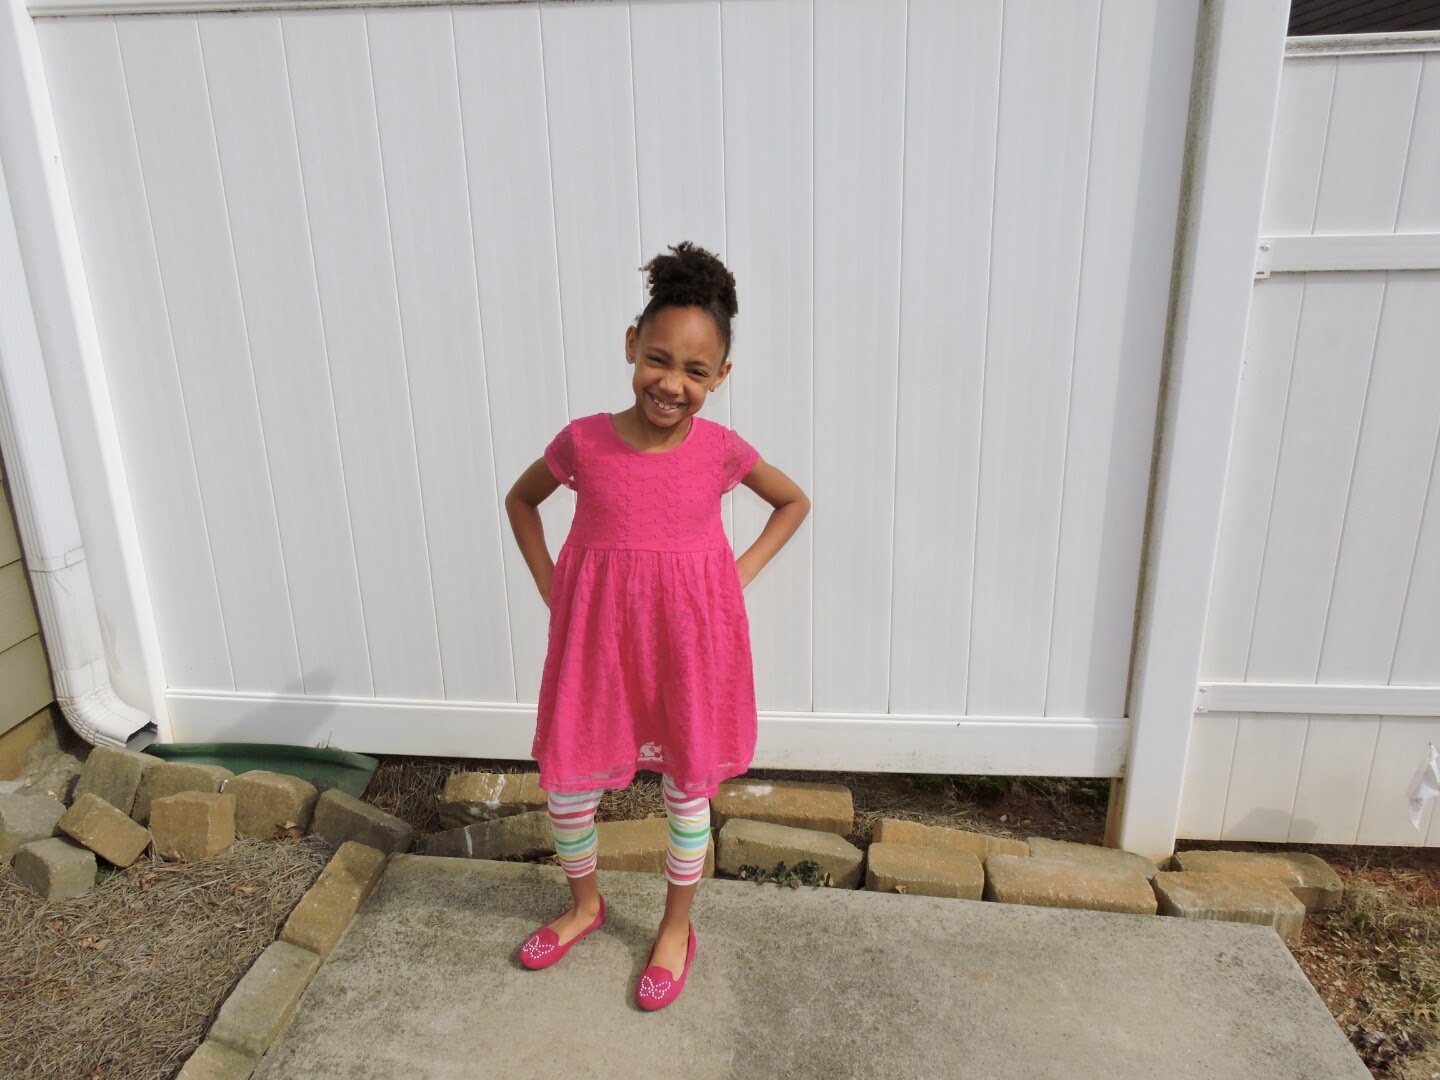 The Girls are Ready for Spring in their FabKids Outfits!  #LoveFabKids  via www.productreviewmom.com